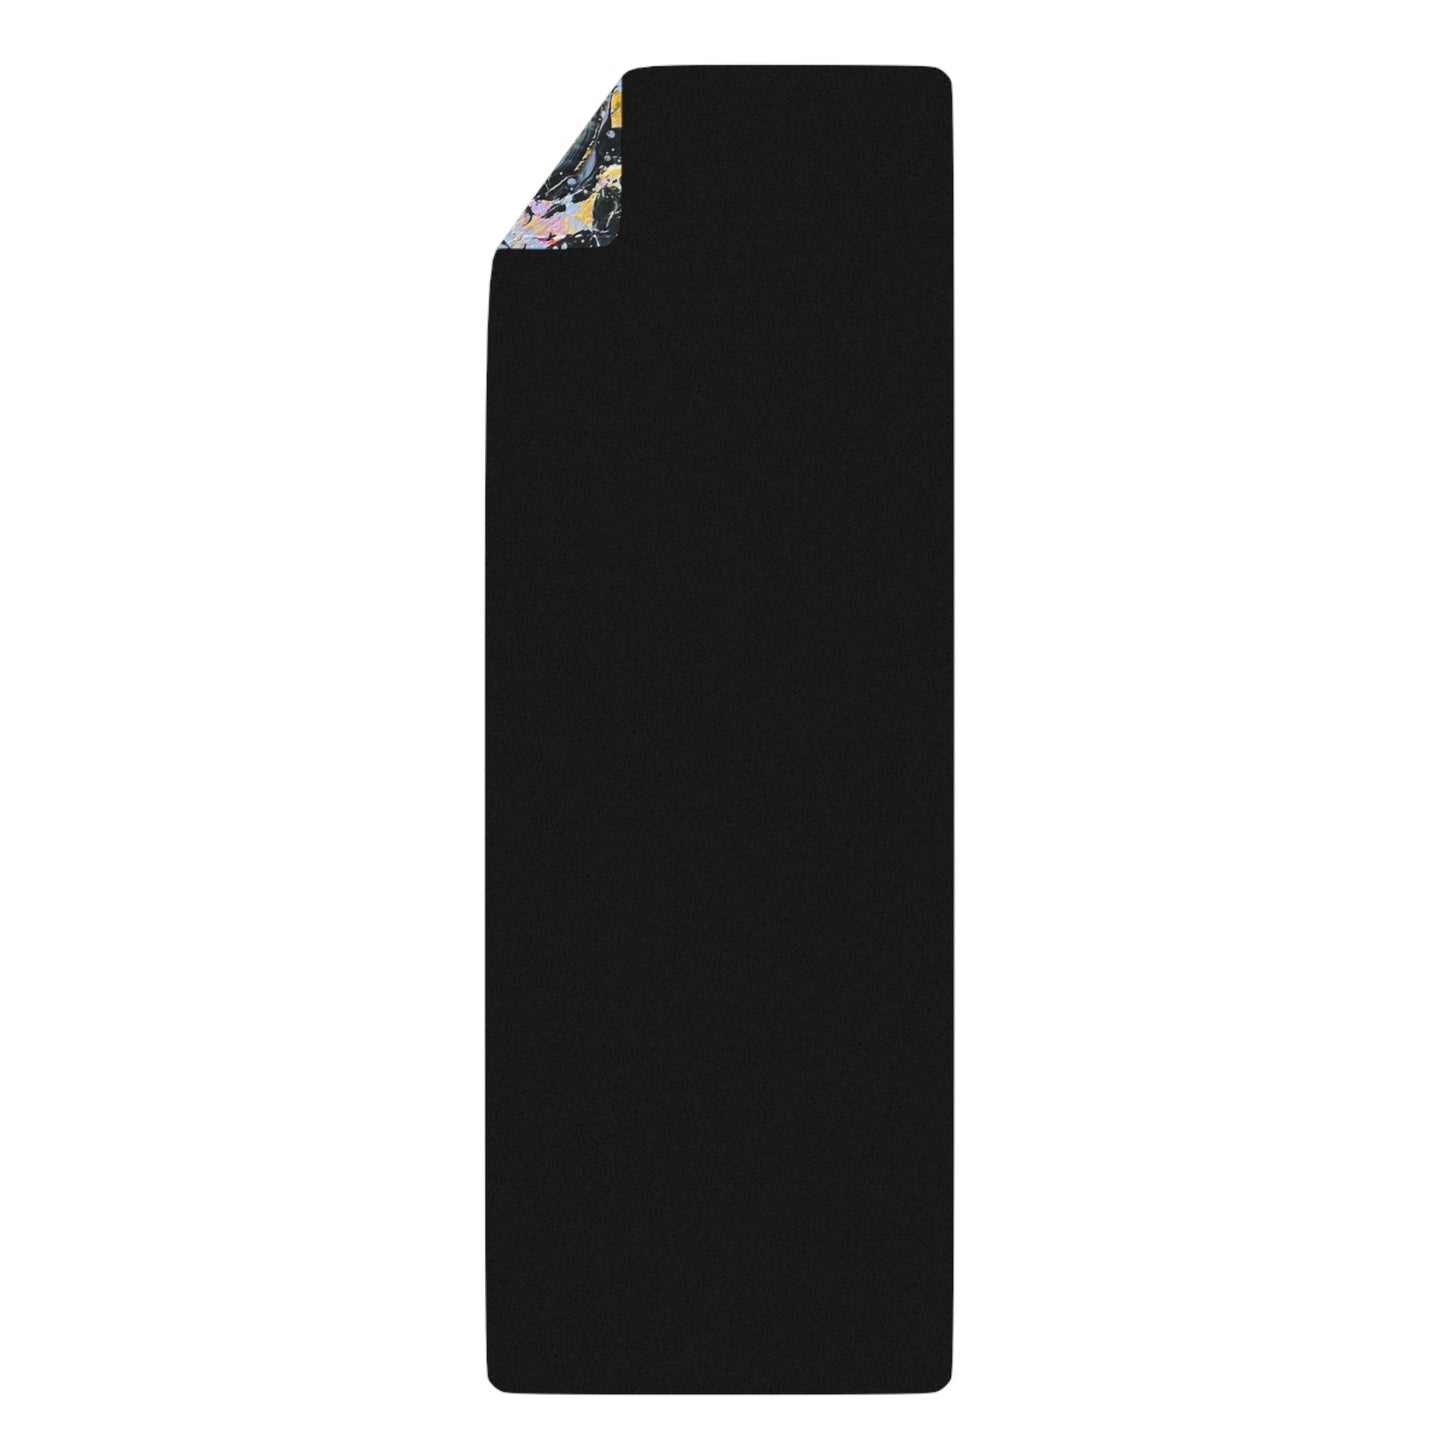 "Will I Open Or Will I Close" Rubber Yoga Mat